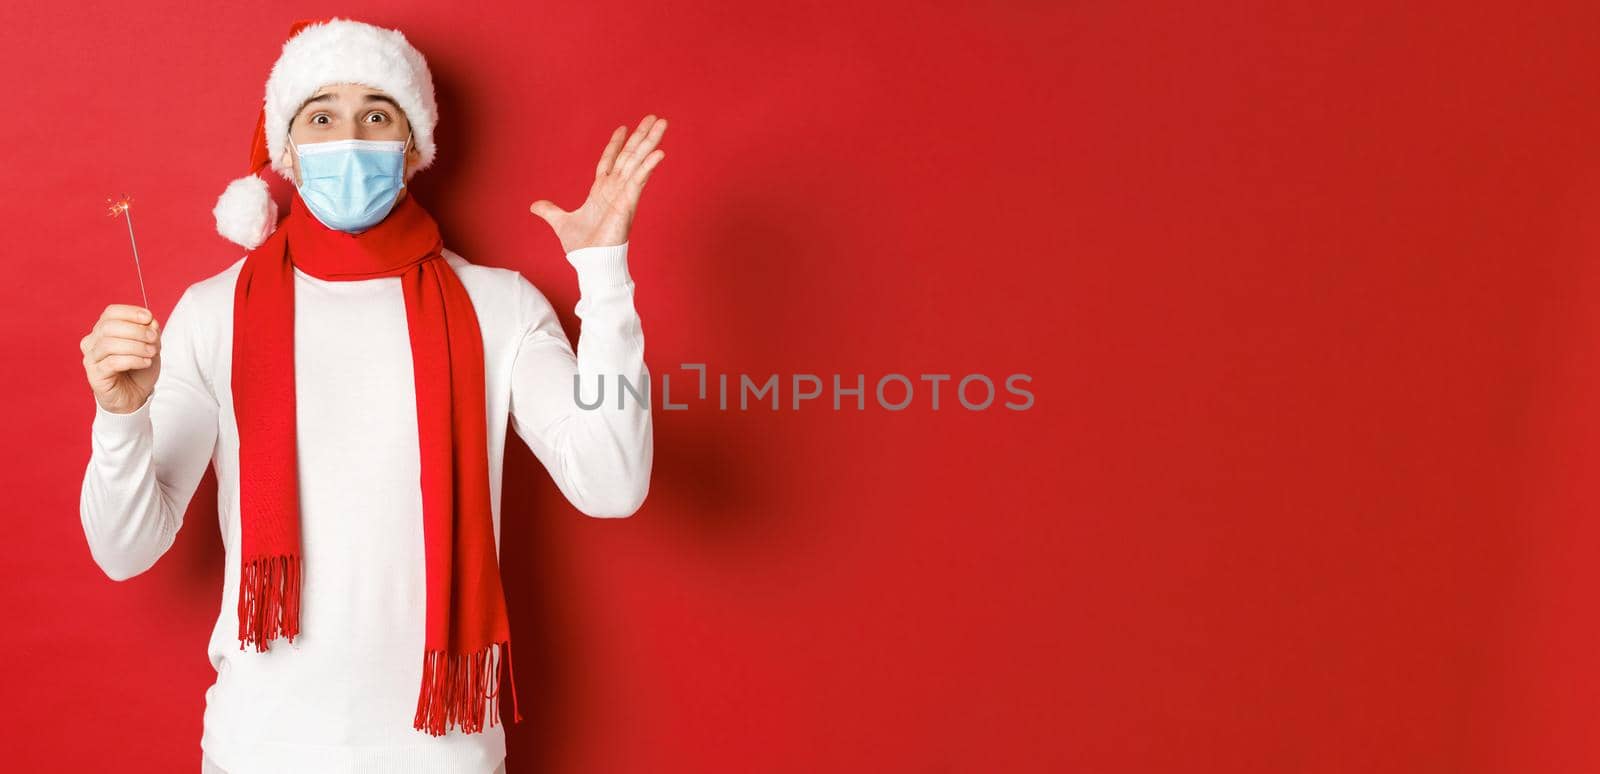 Concept of covid-19, christmas and holidays during pandemic. Cheerful handsome man in medical mask and santa hat, celebrating new year with sparkler, looking excited, red background.